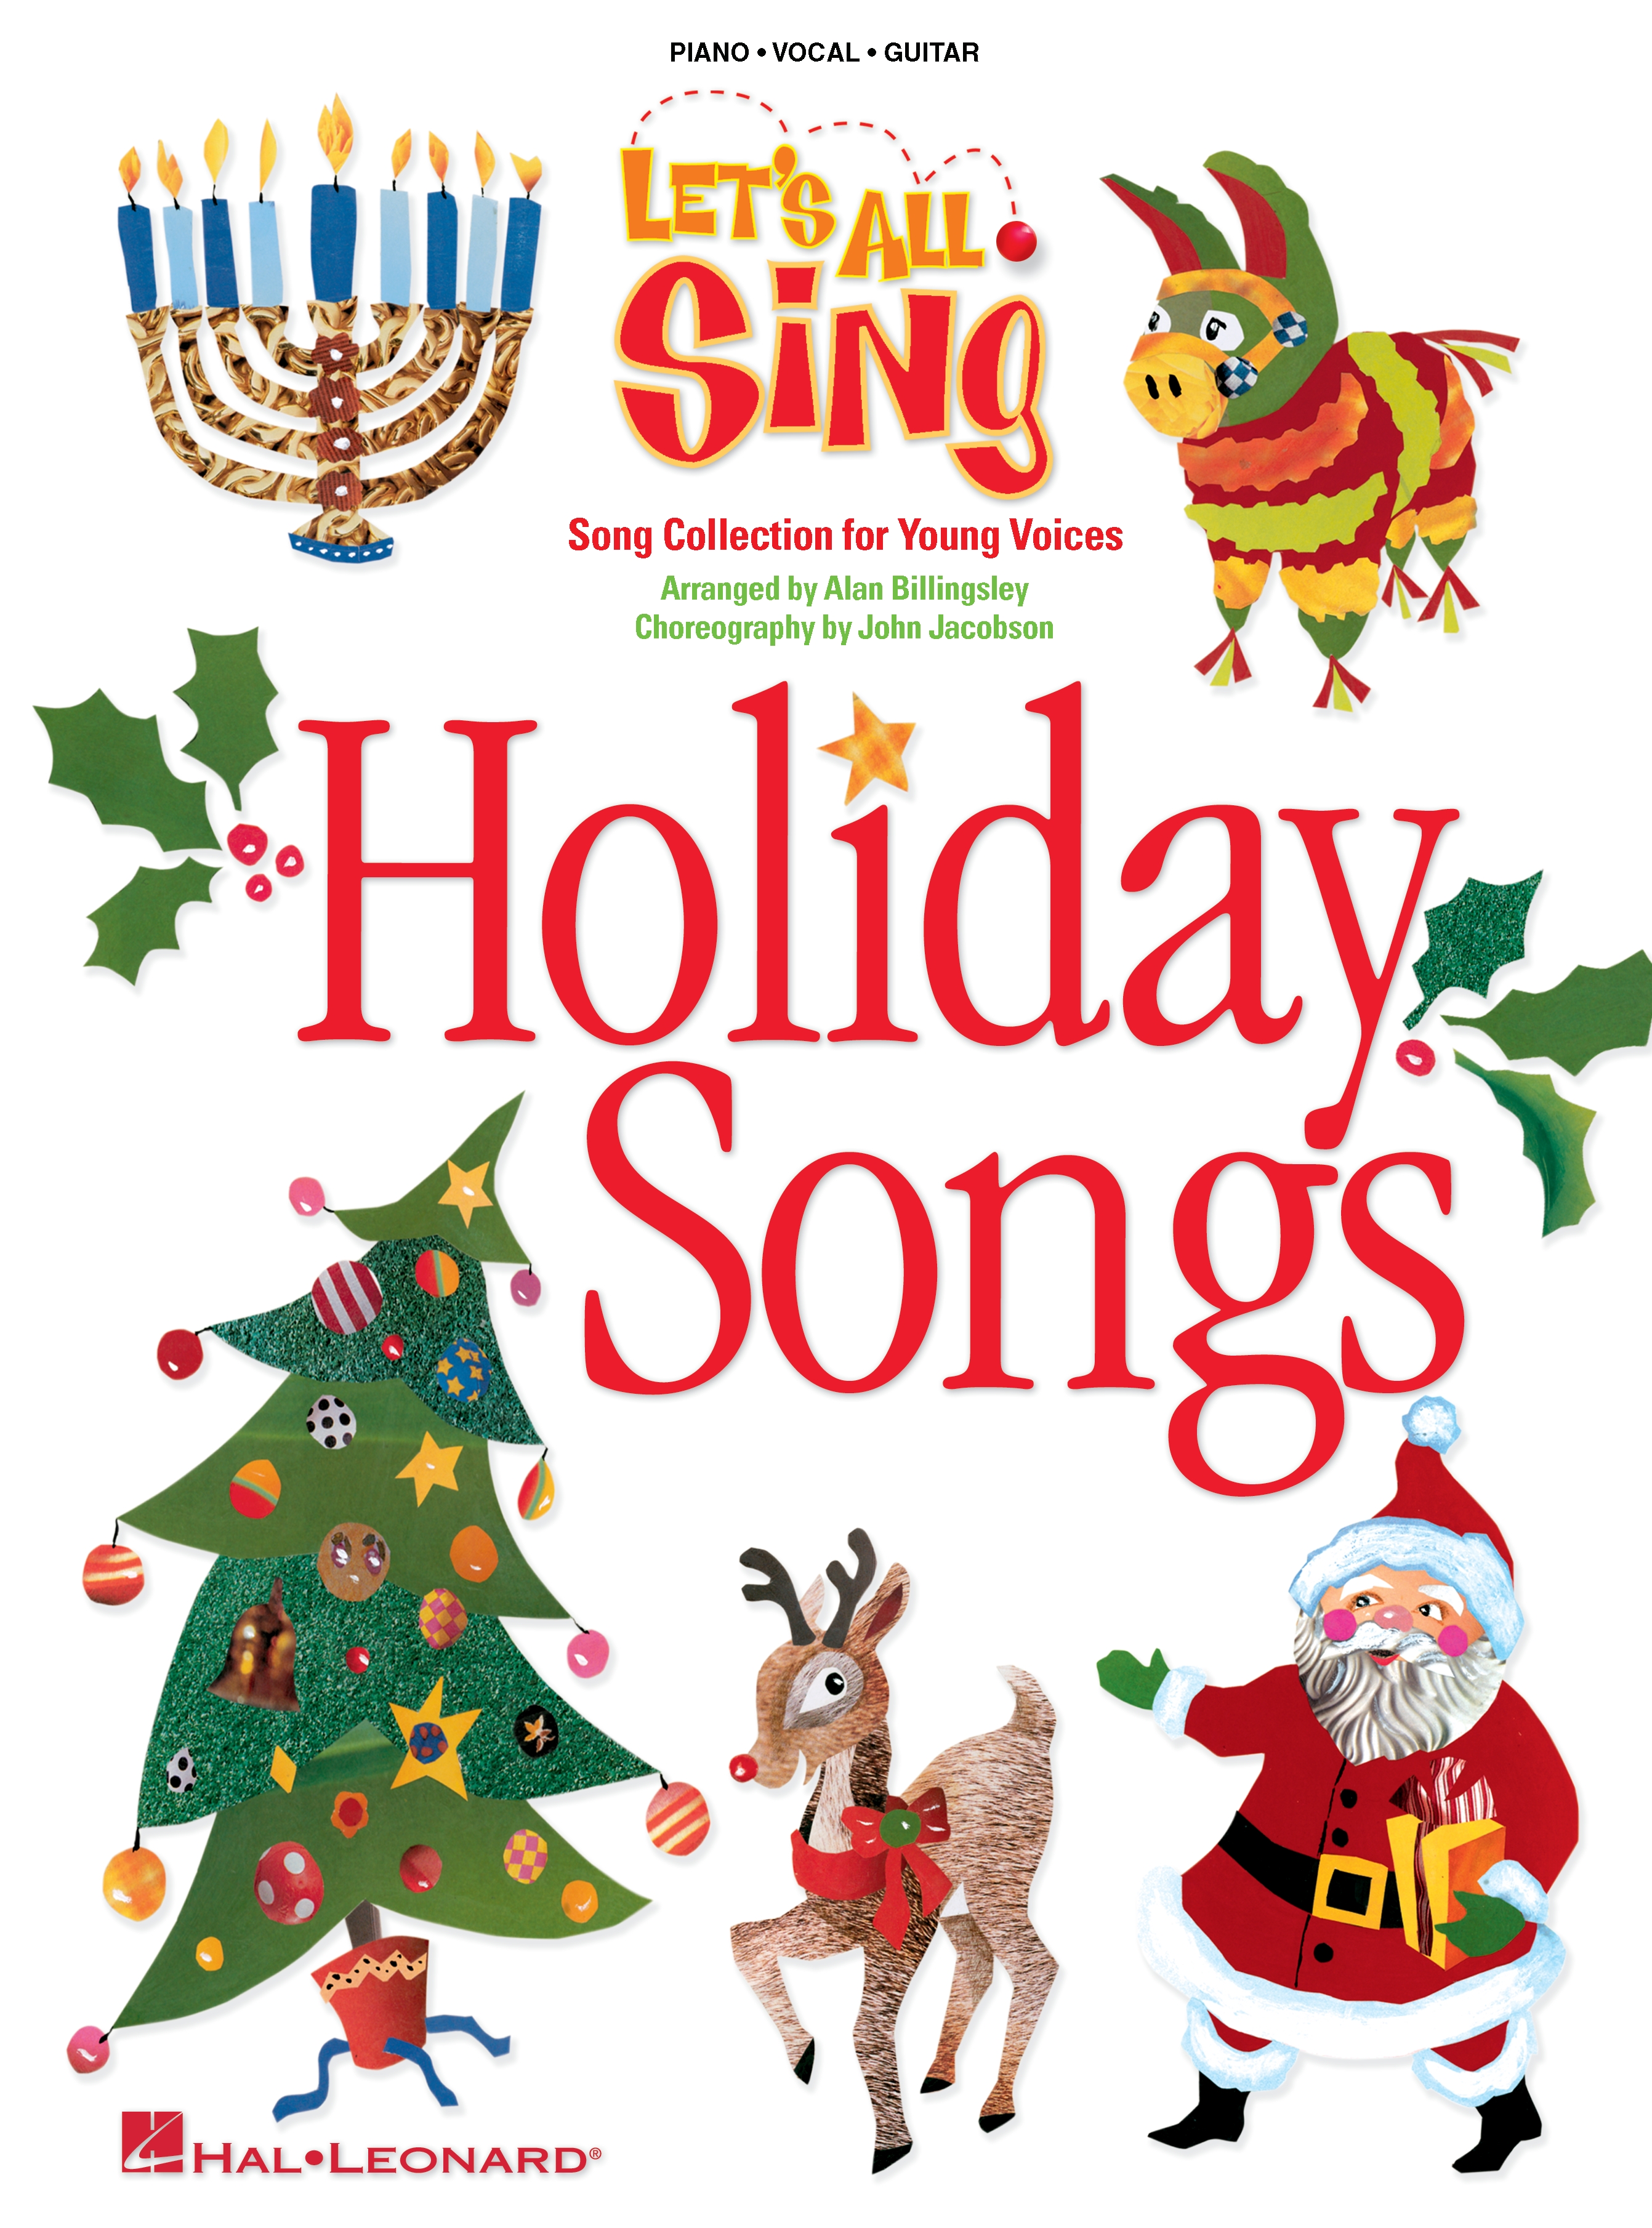 Let's All Sing Holiday Songs